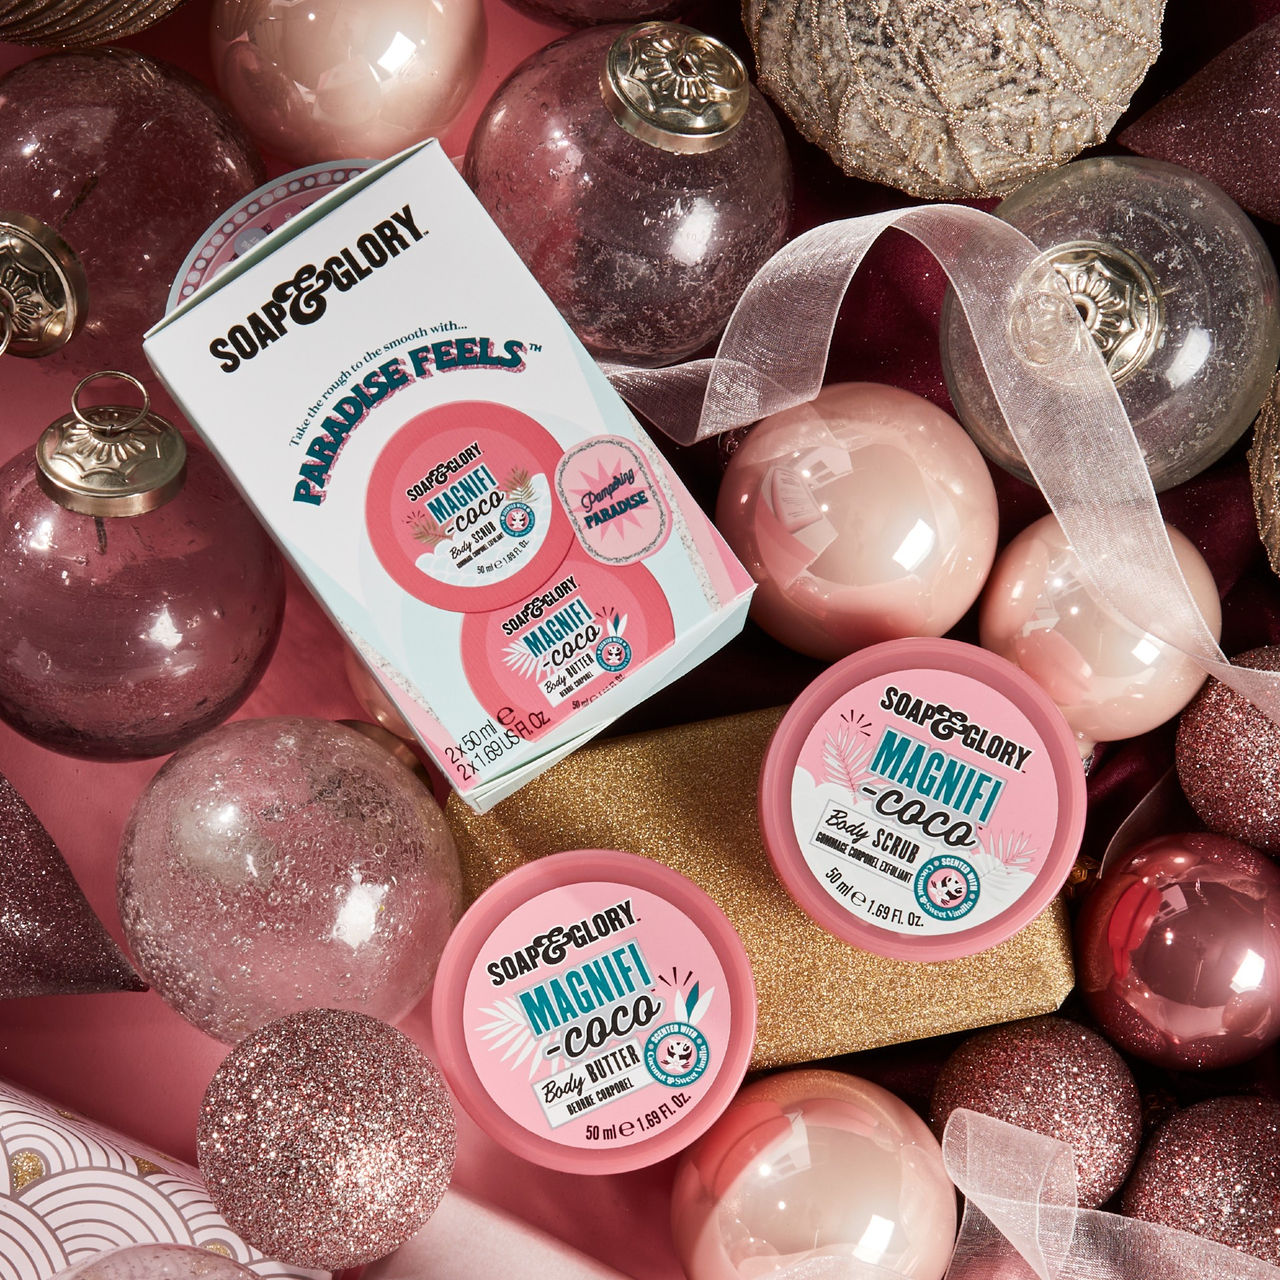 Soap and glory stocking fillers christmas gifts